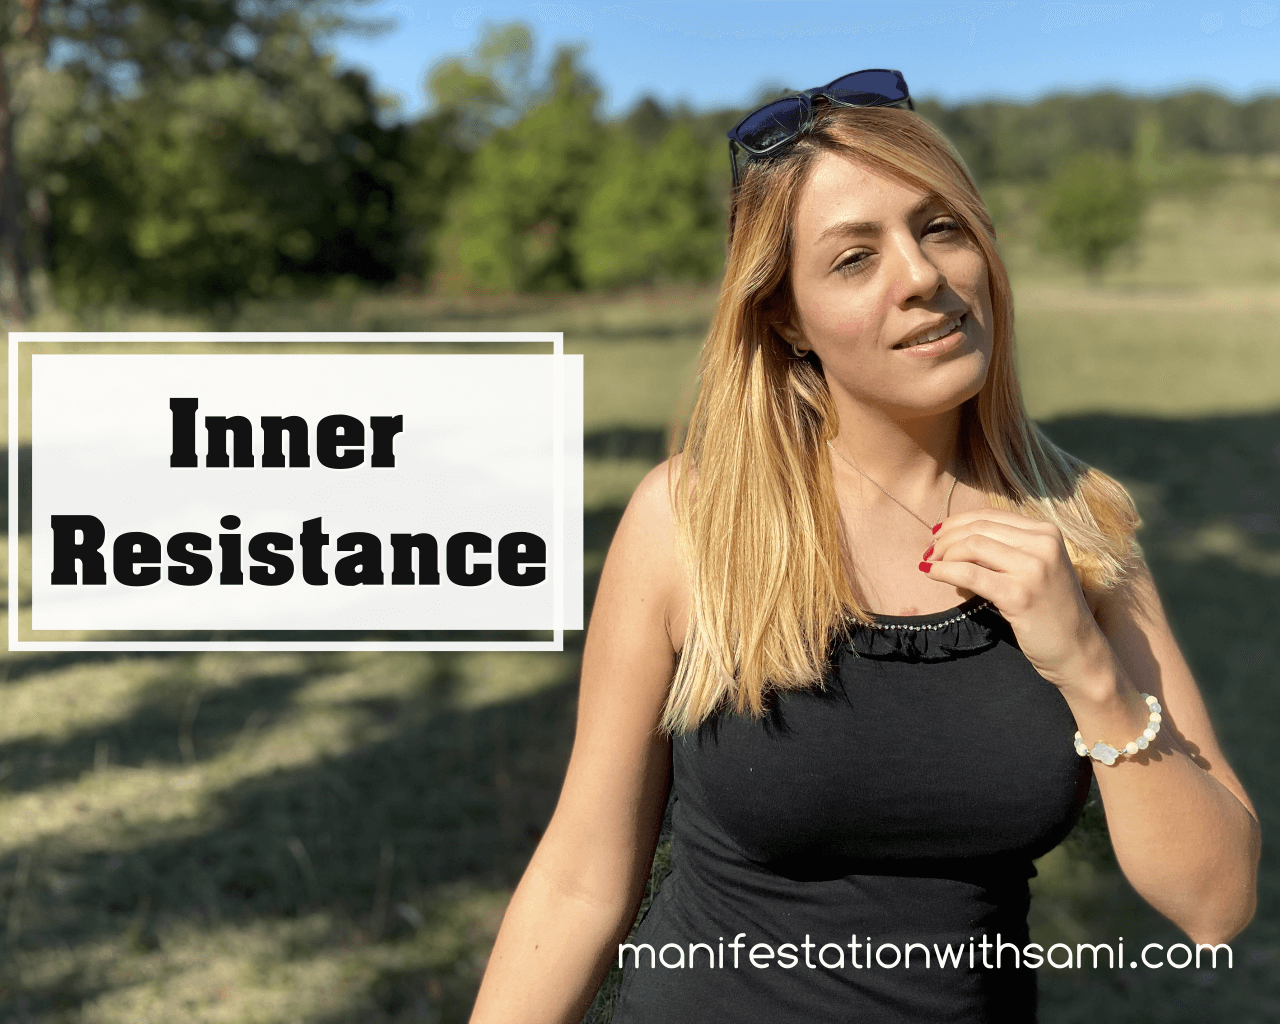 Find your own resistance, limiting beliefs, and inner obstacles to manifest your desire.